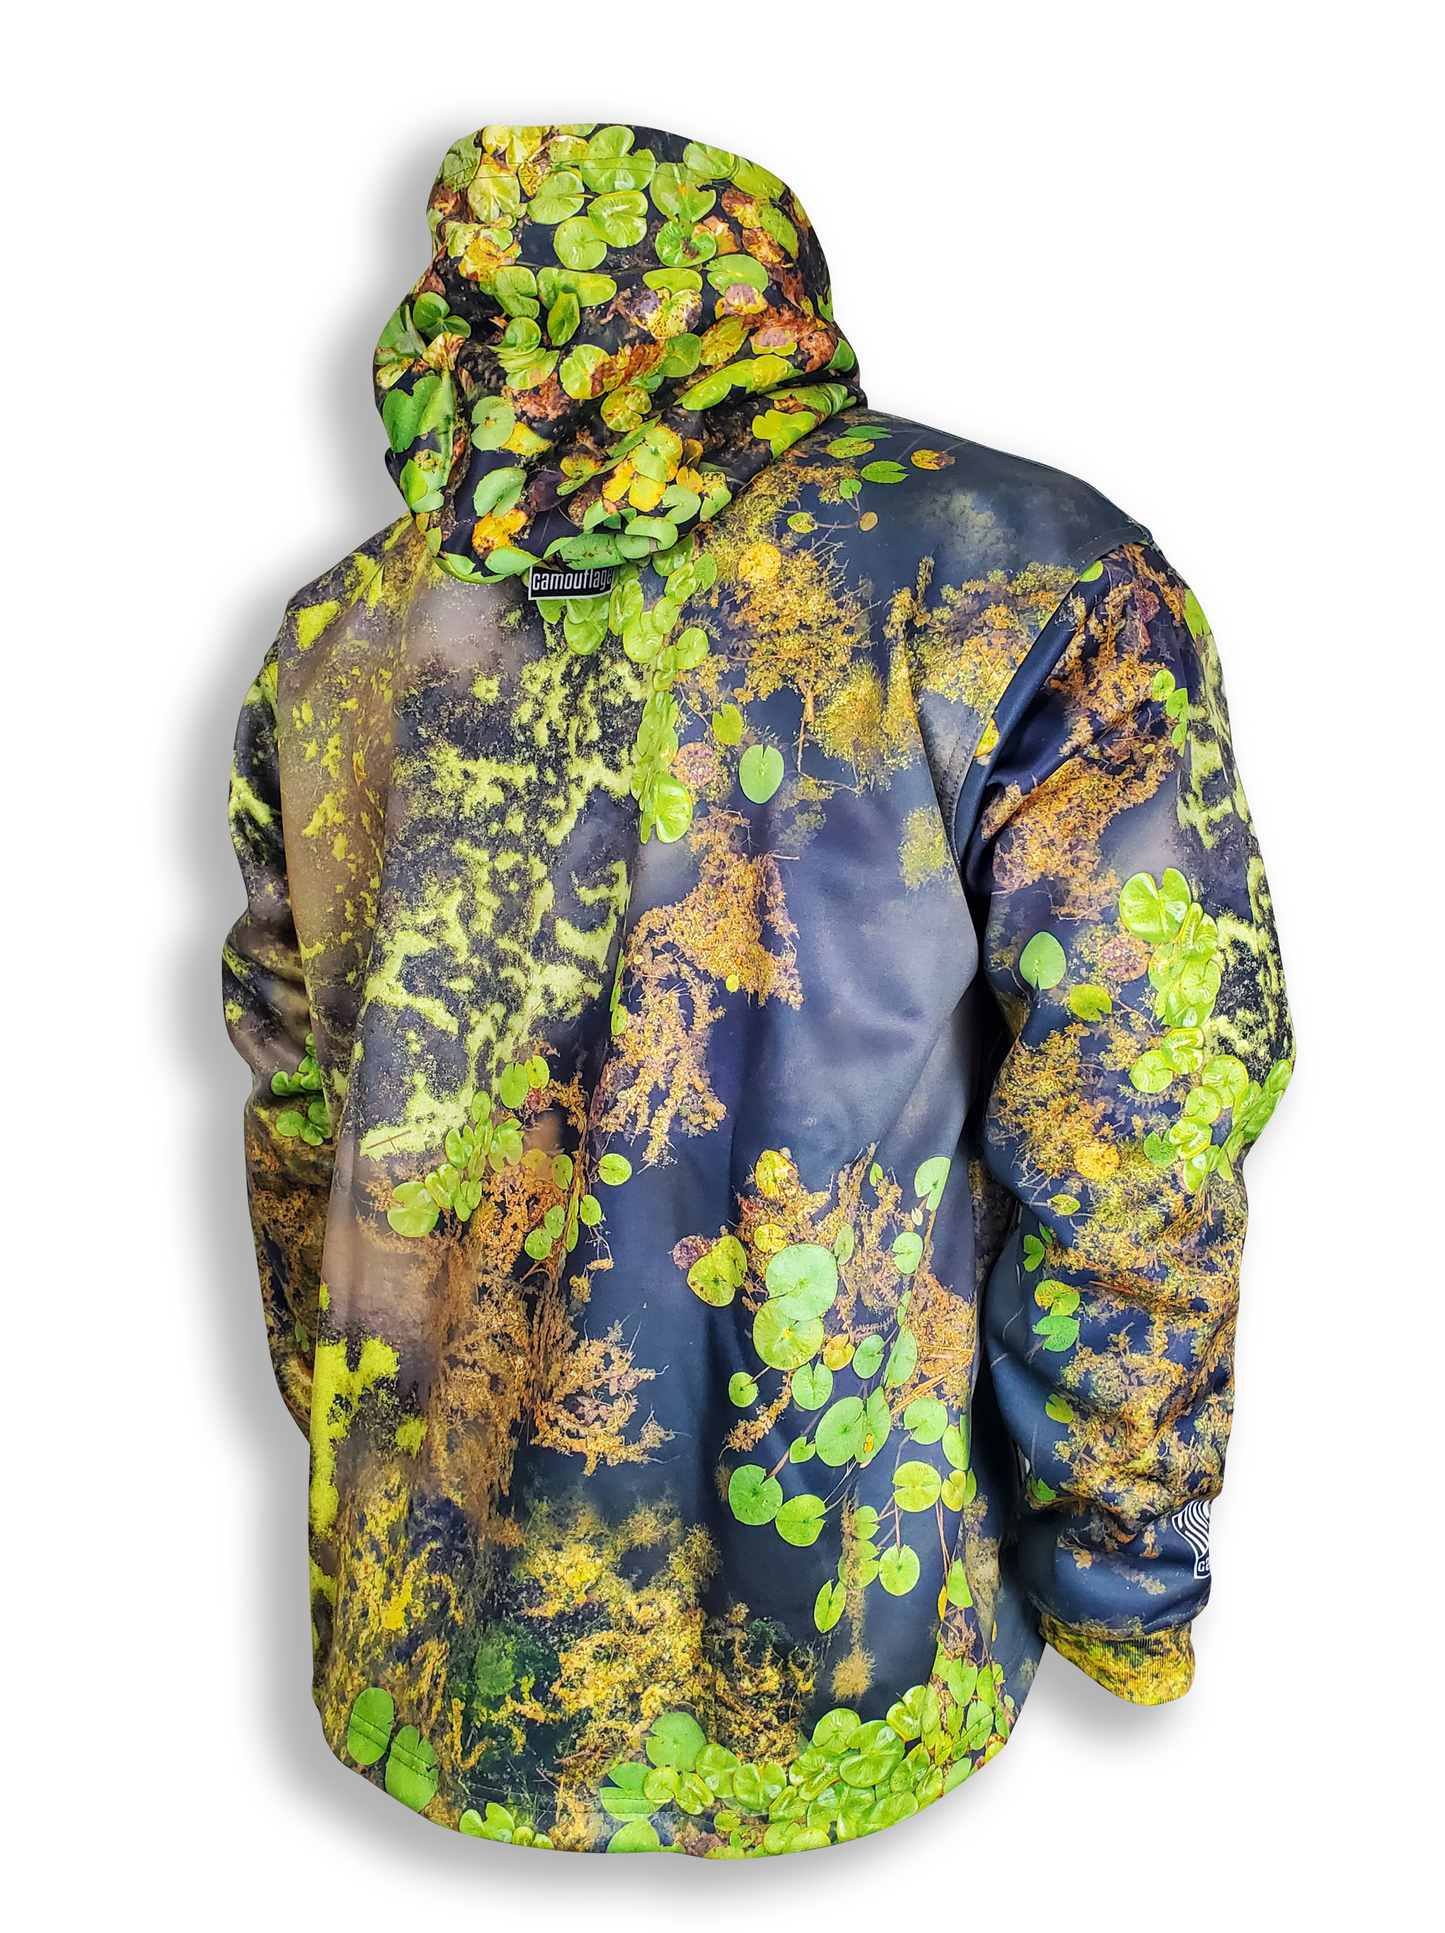 Clearance - LIFESTYLE Fishing Apparel - Slop Camo - Hoodie